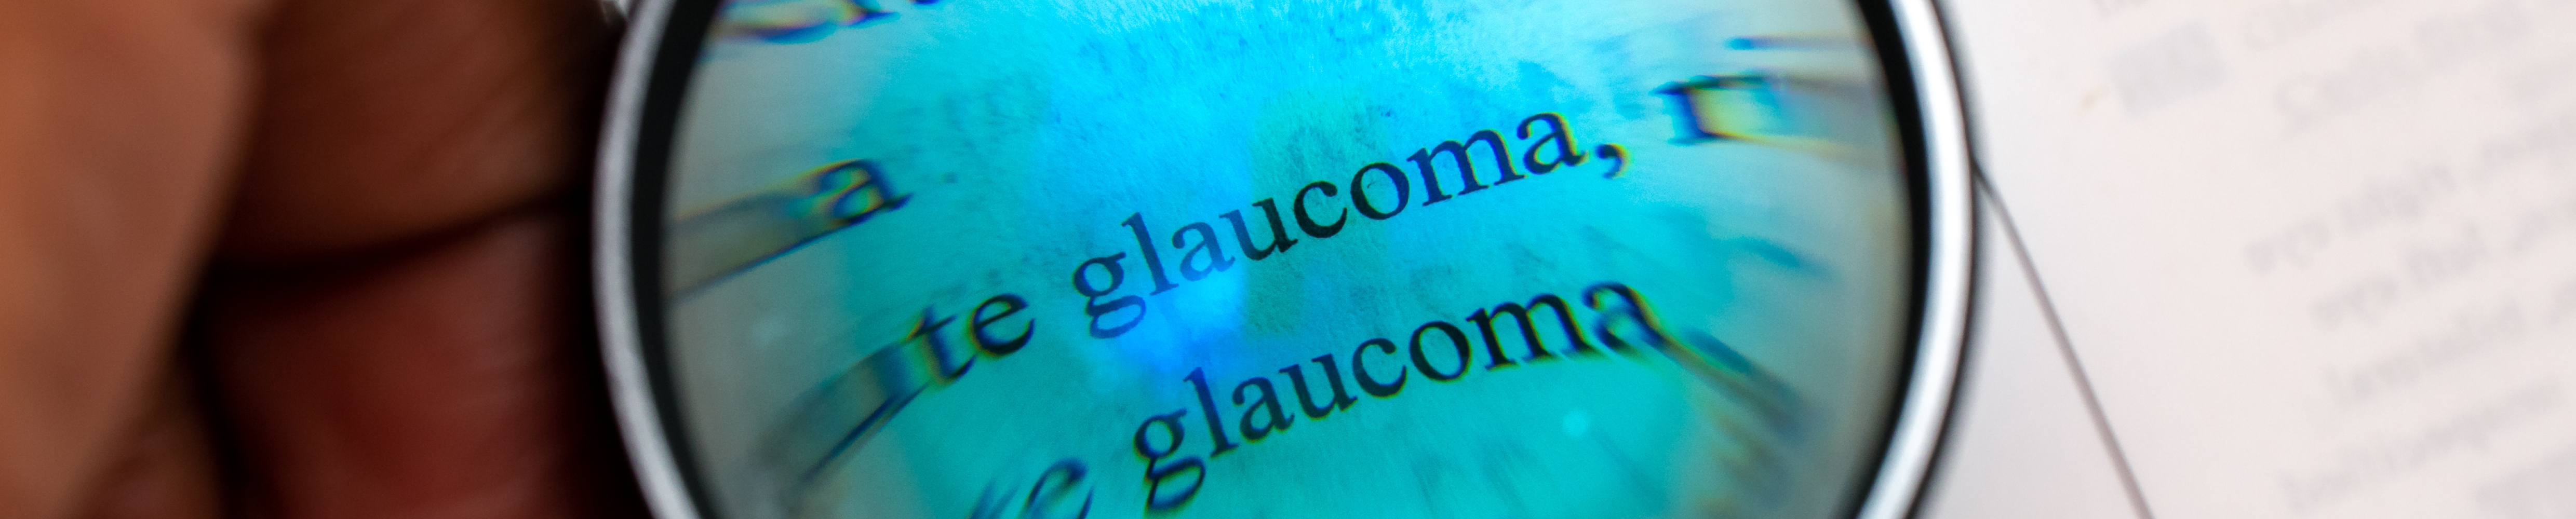 Magnifying glass showing the word glaucoma